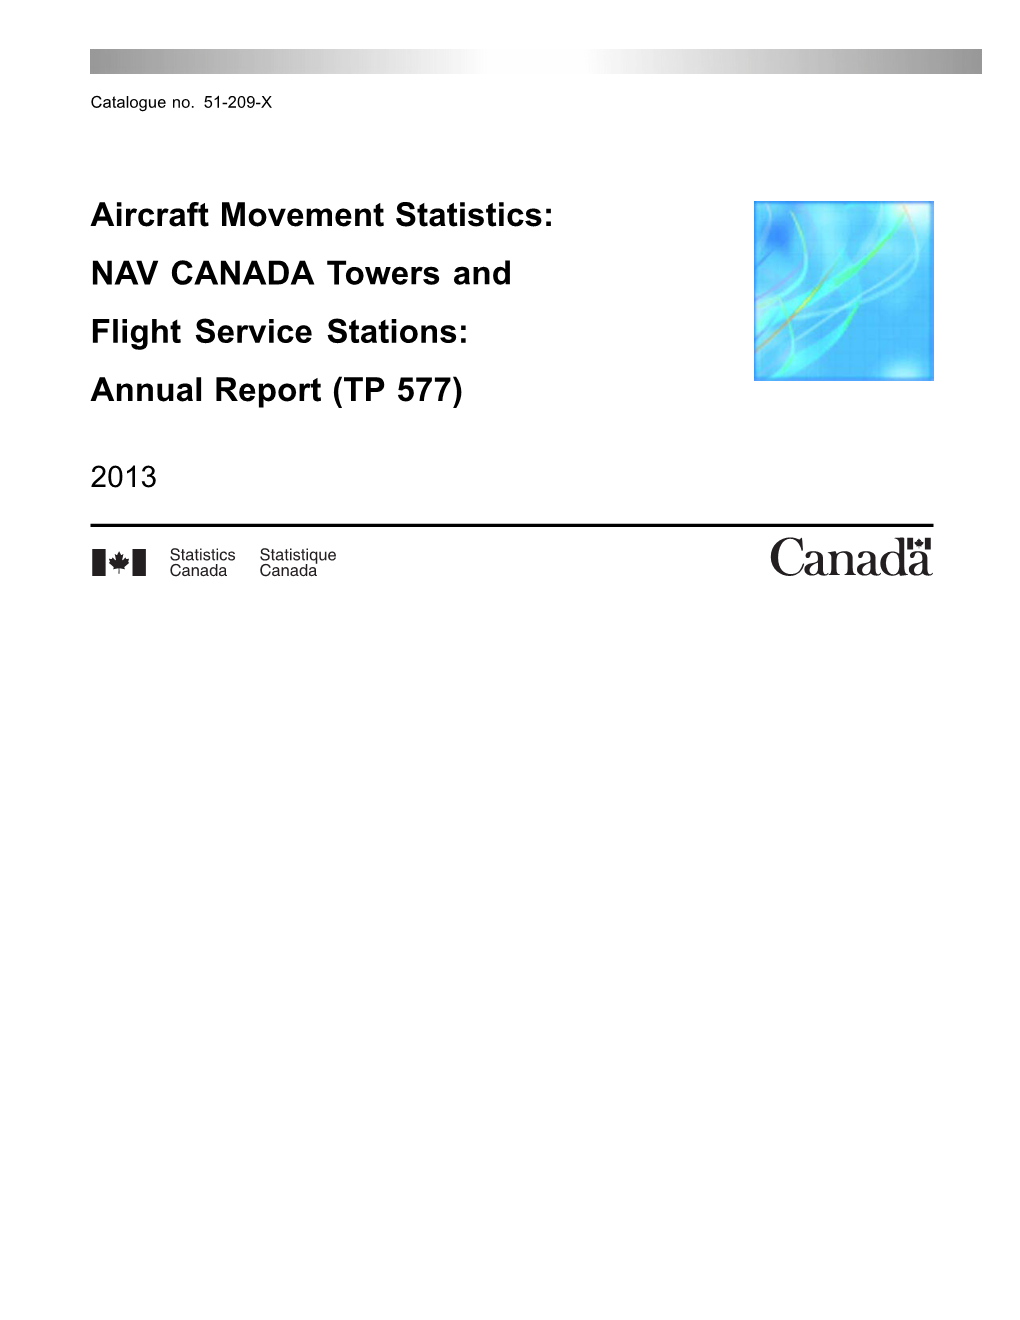 NAV CANADA Towers and Flight Service Stations: Annual Report (TP 577)